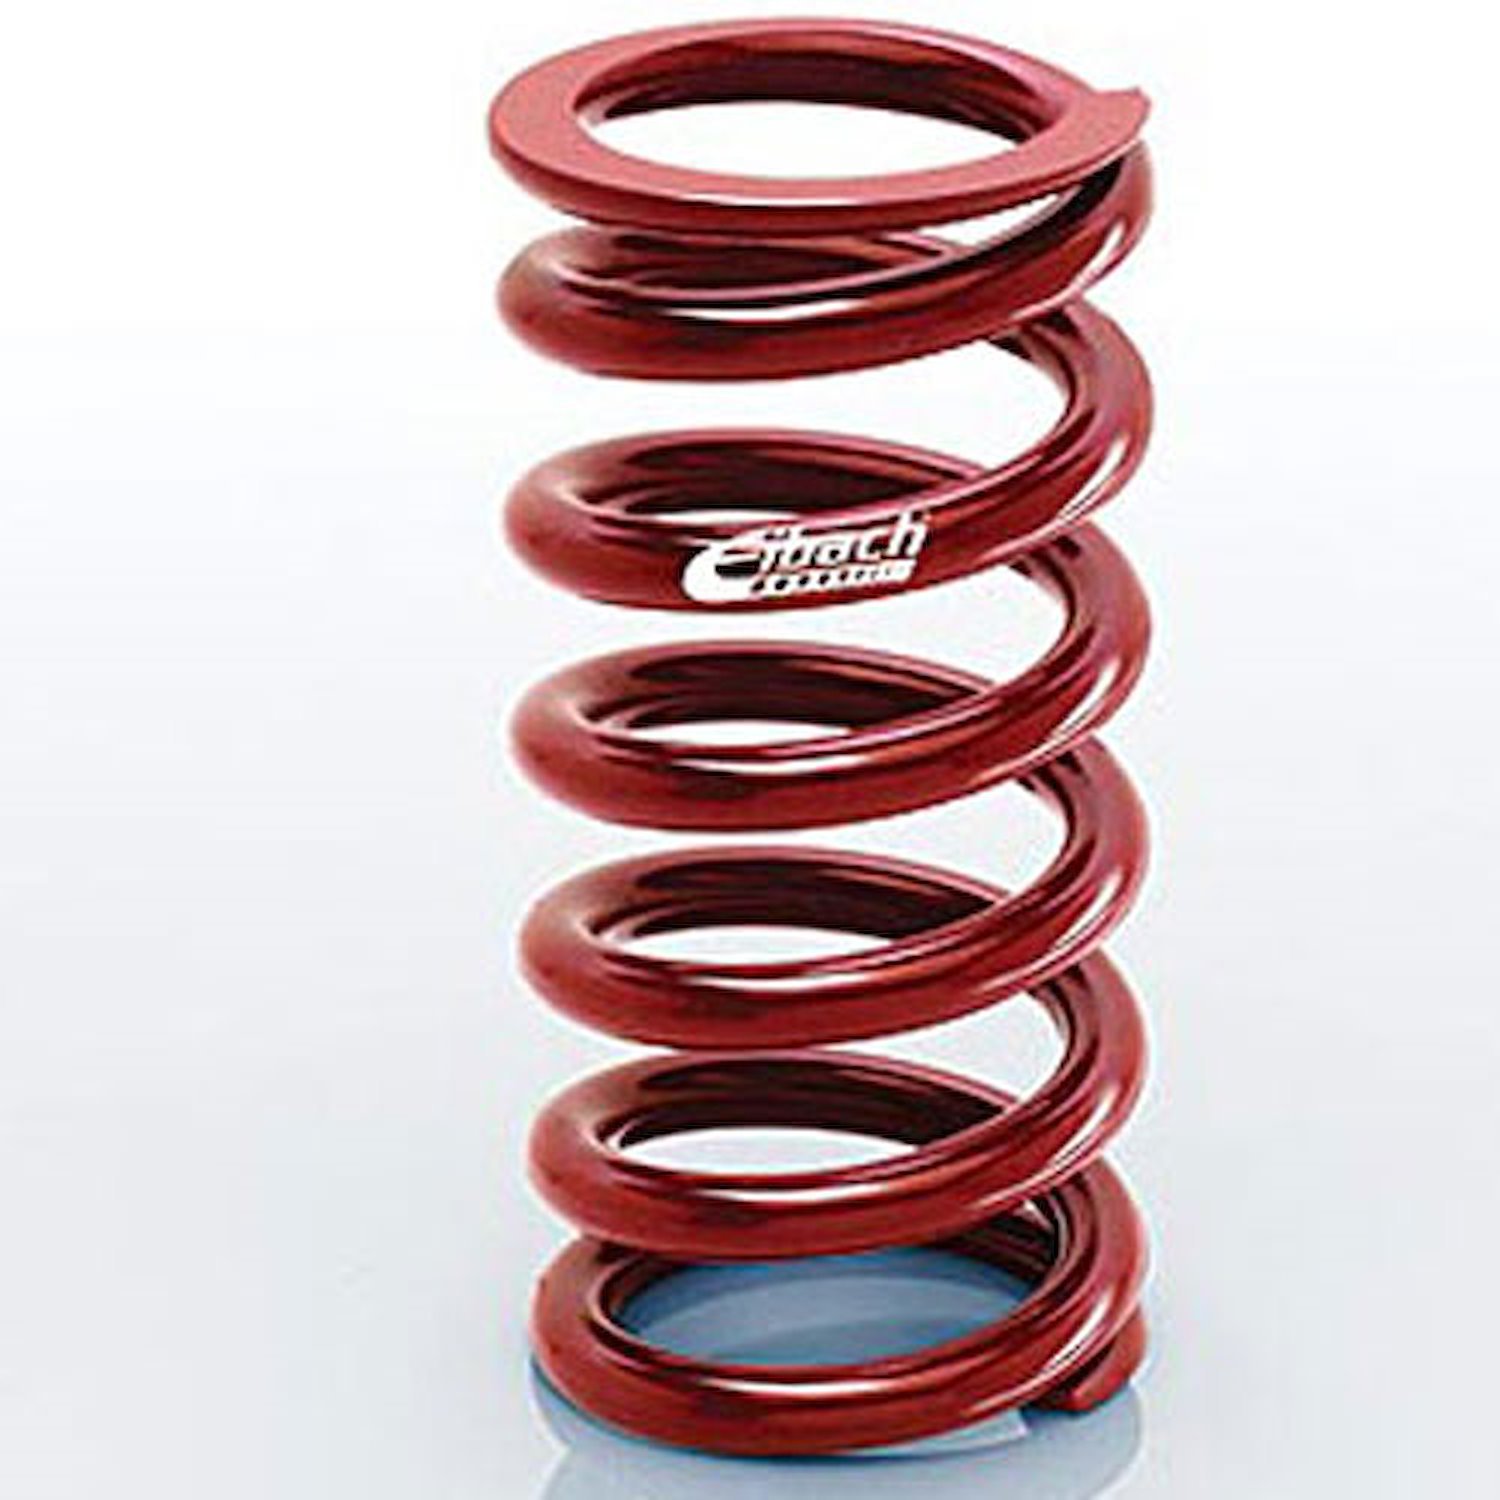 0950.500.0300 EIBACH CONVENTIONAL FRONT SPRING